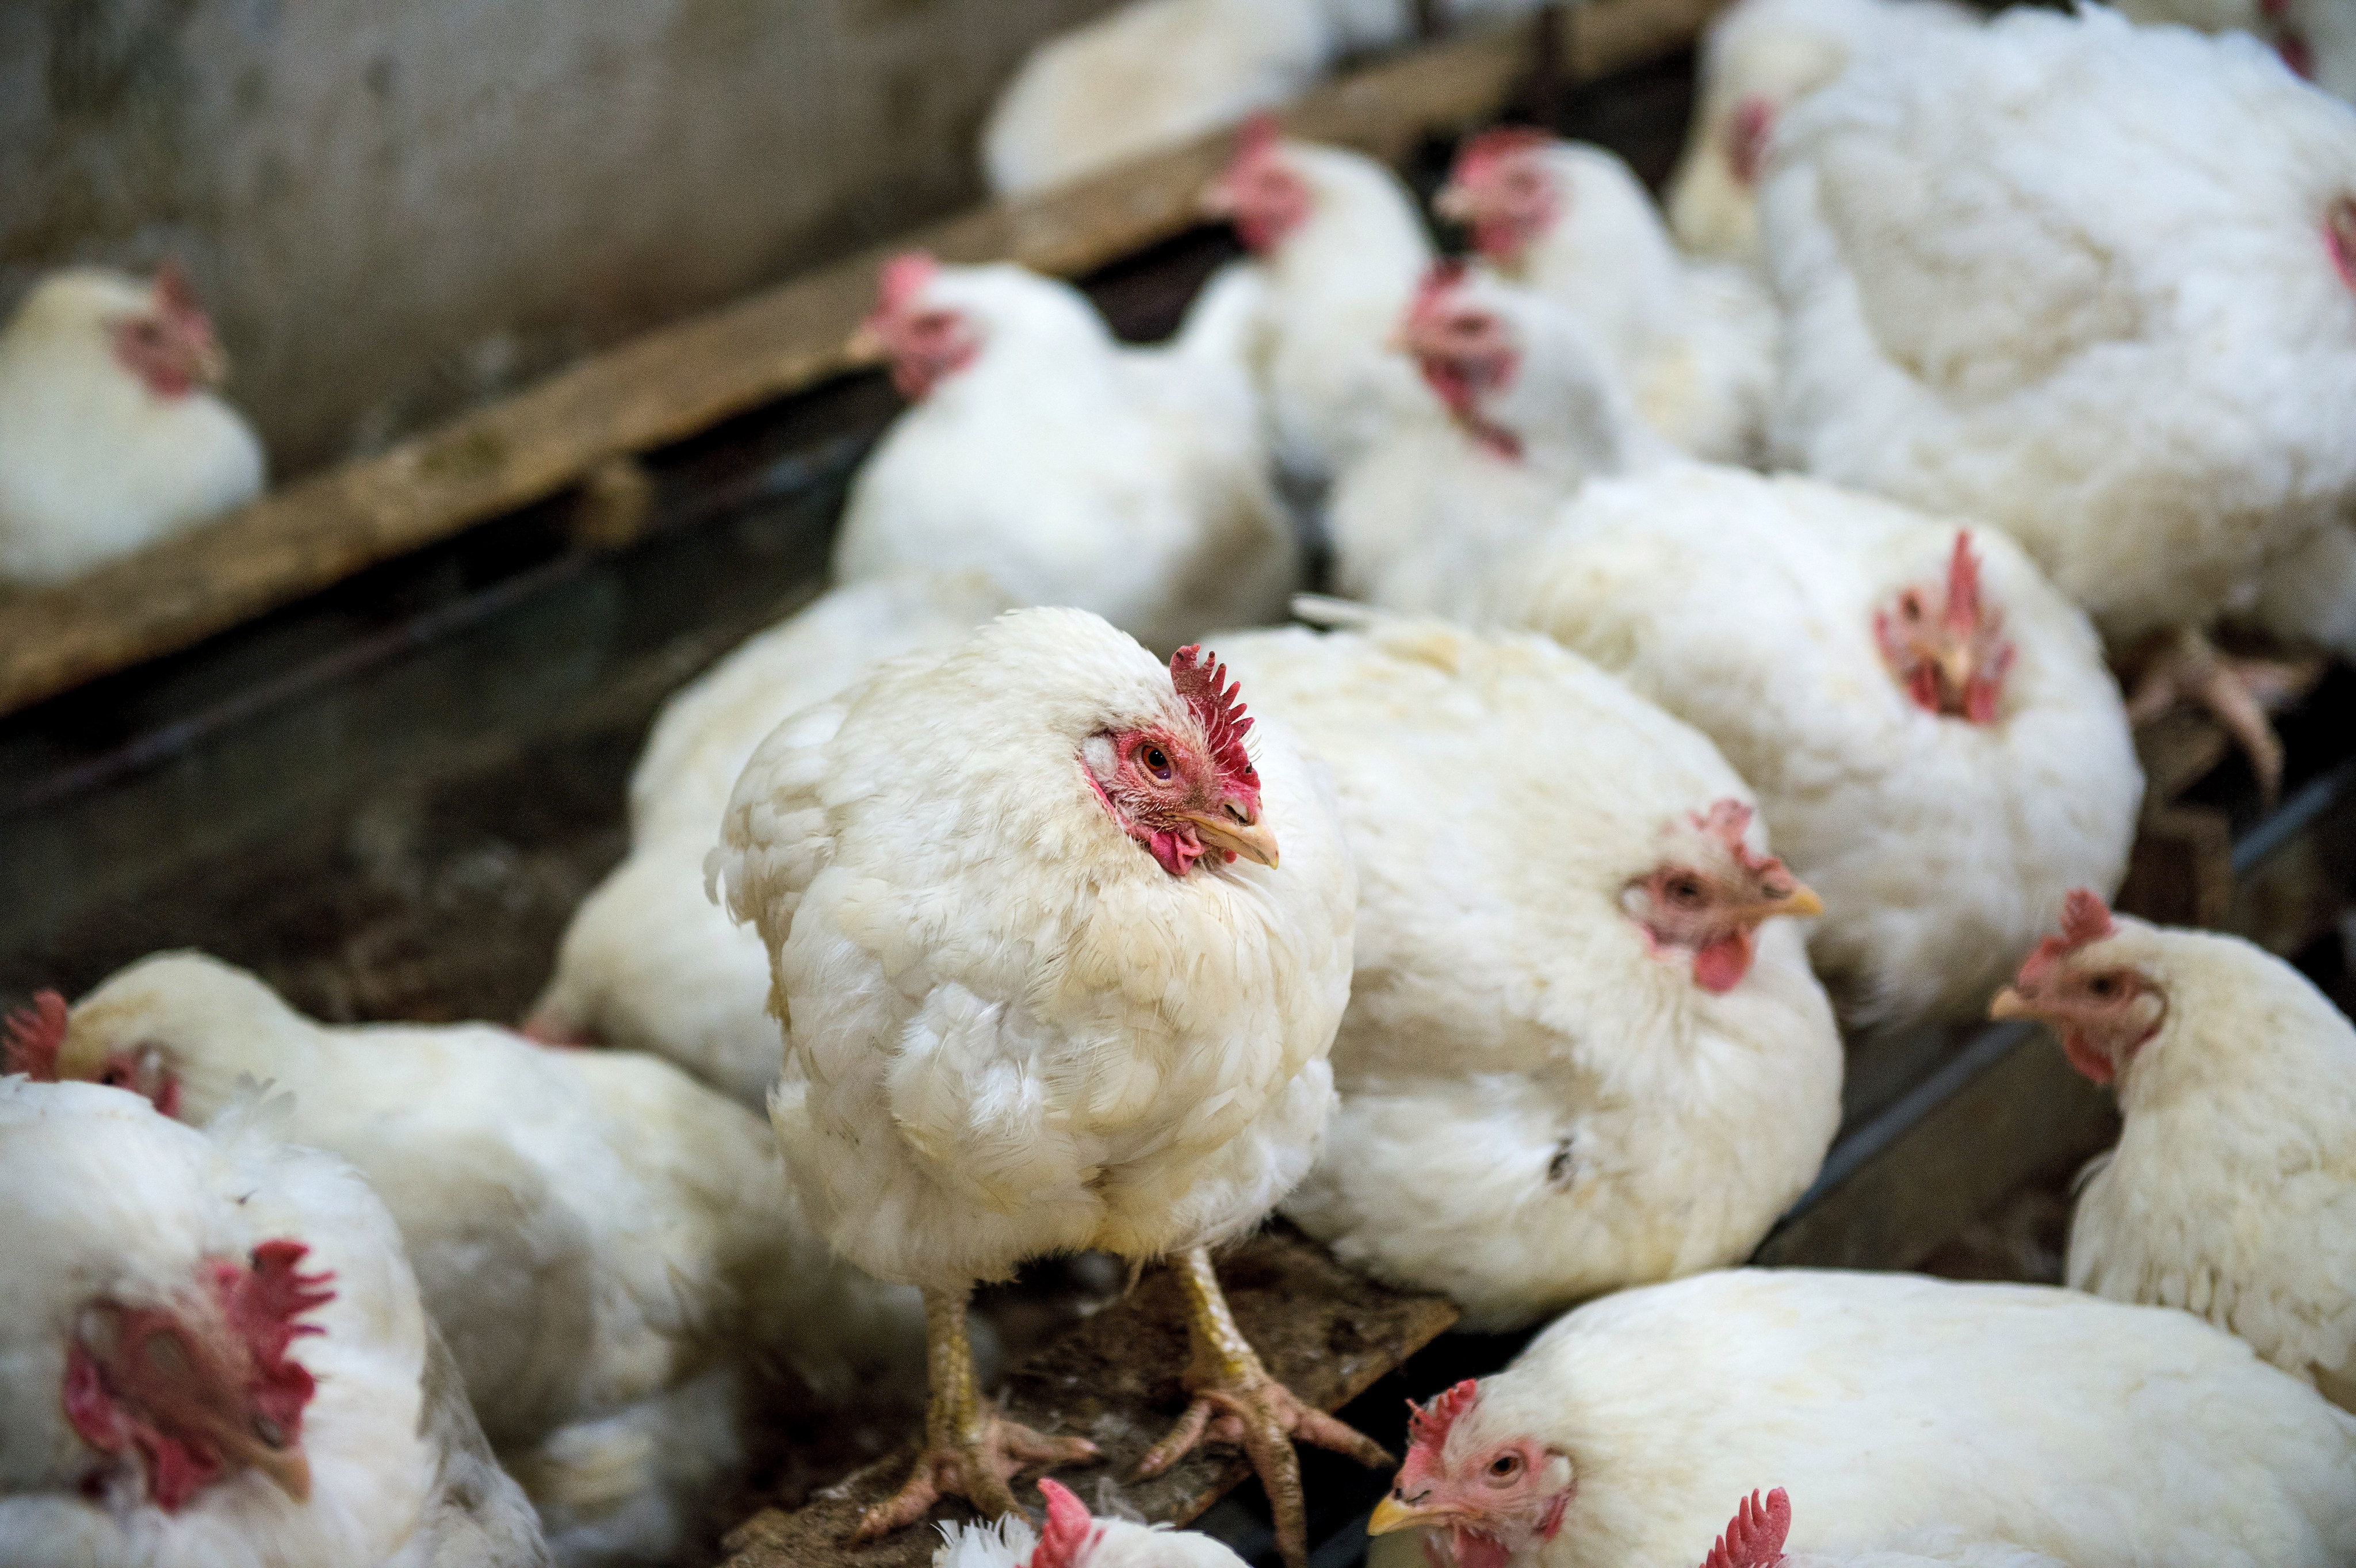 About a million birds have been culled in Britain recently, mostly at poultry farms. Photo: Shutterstock